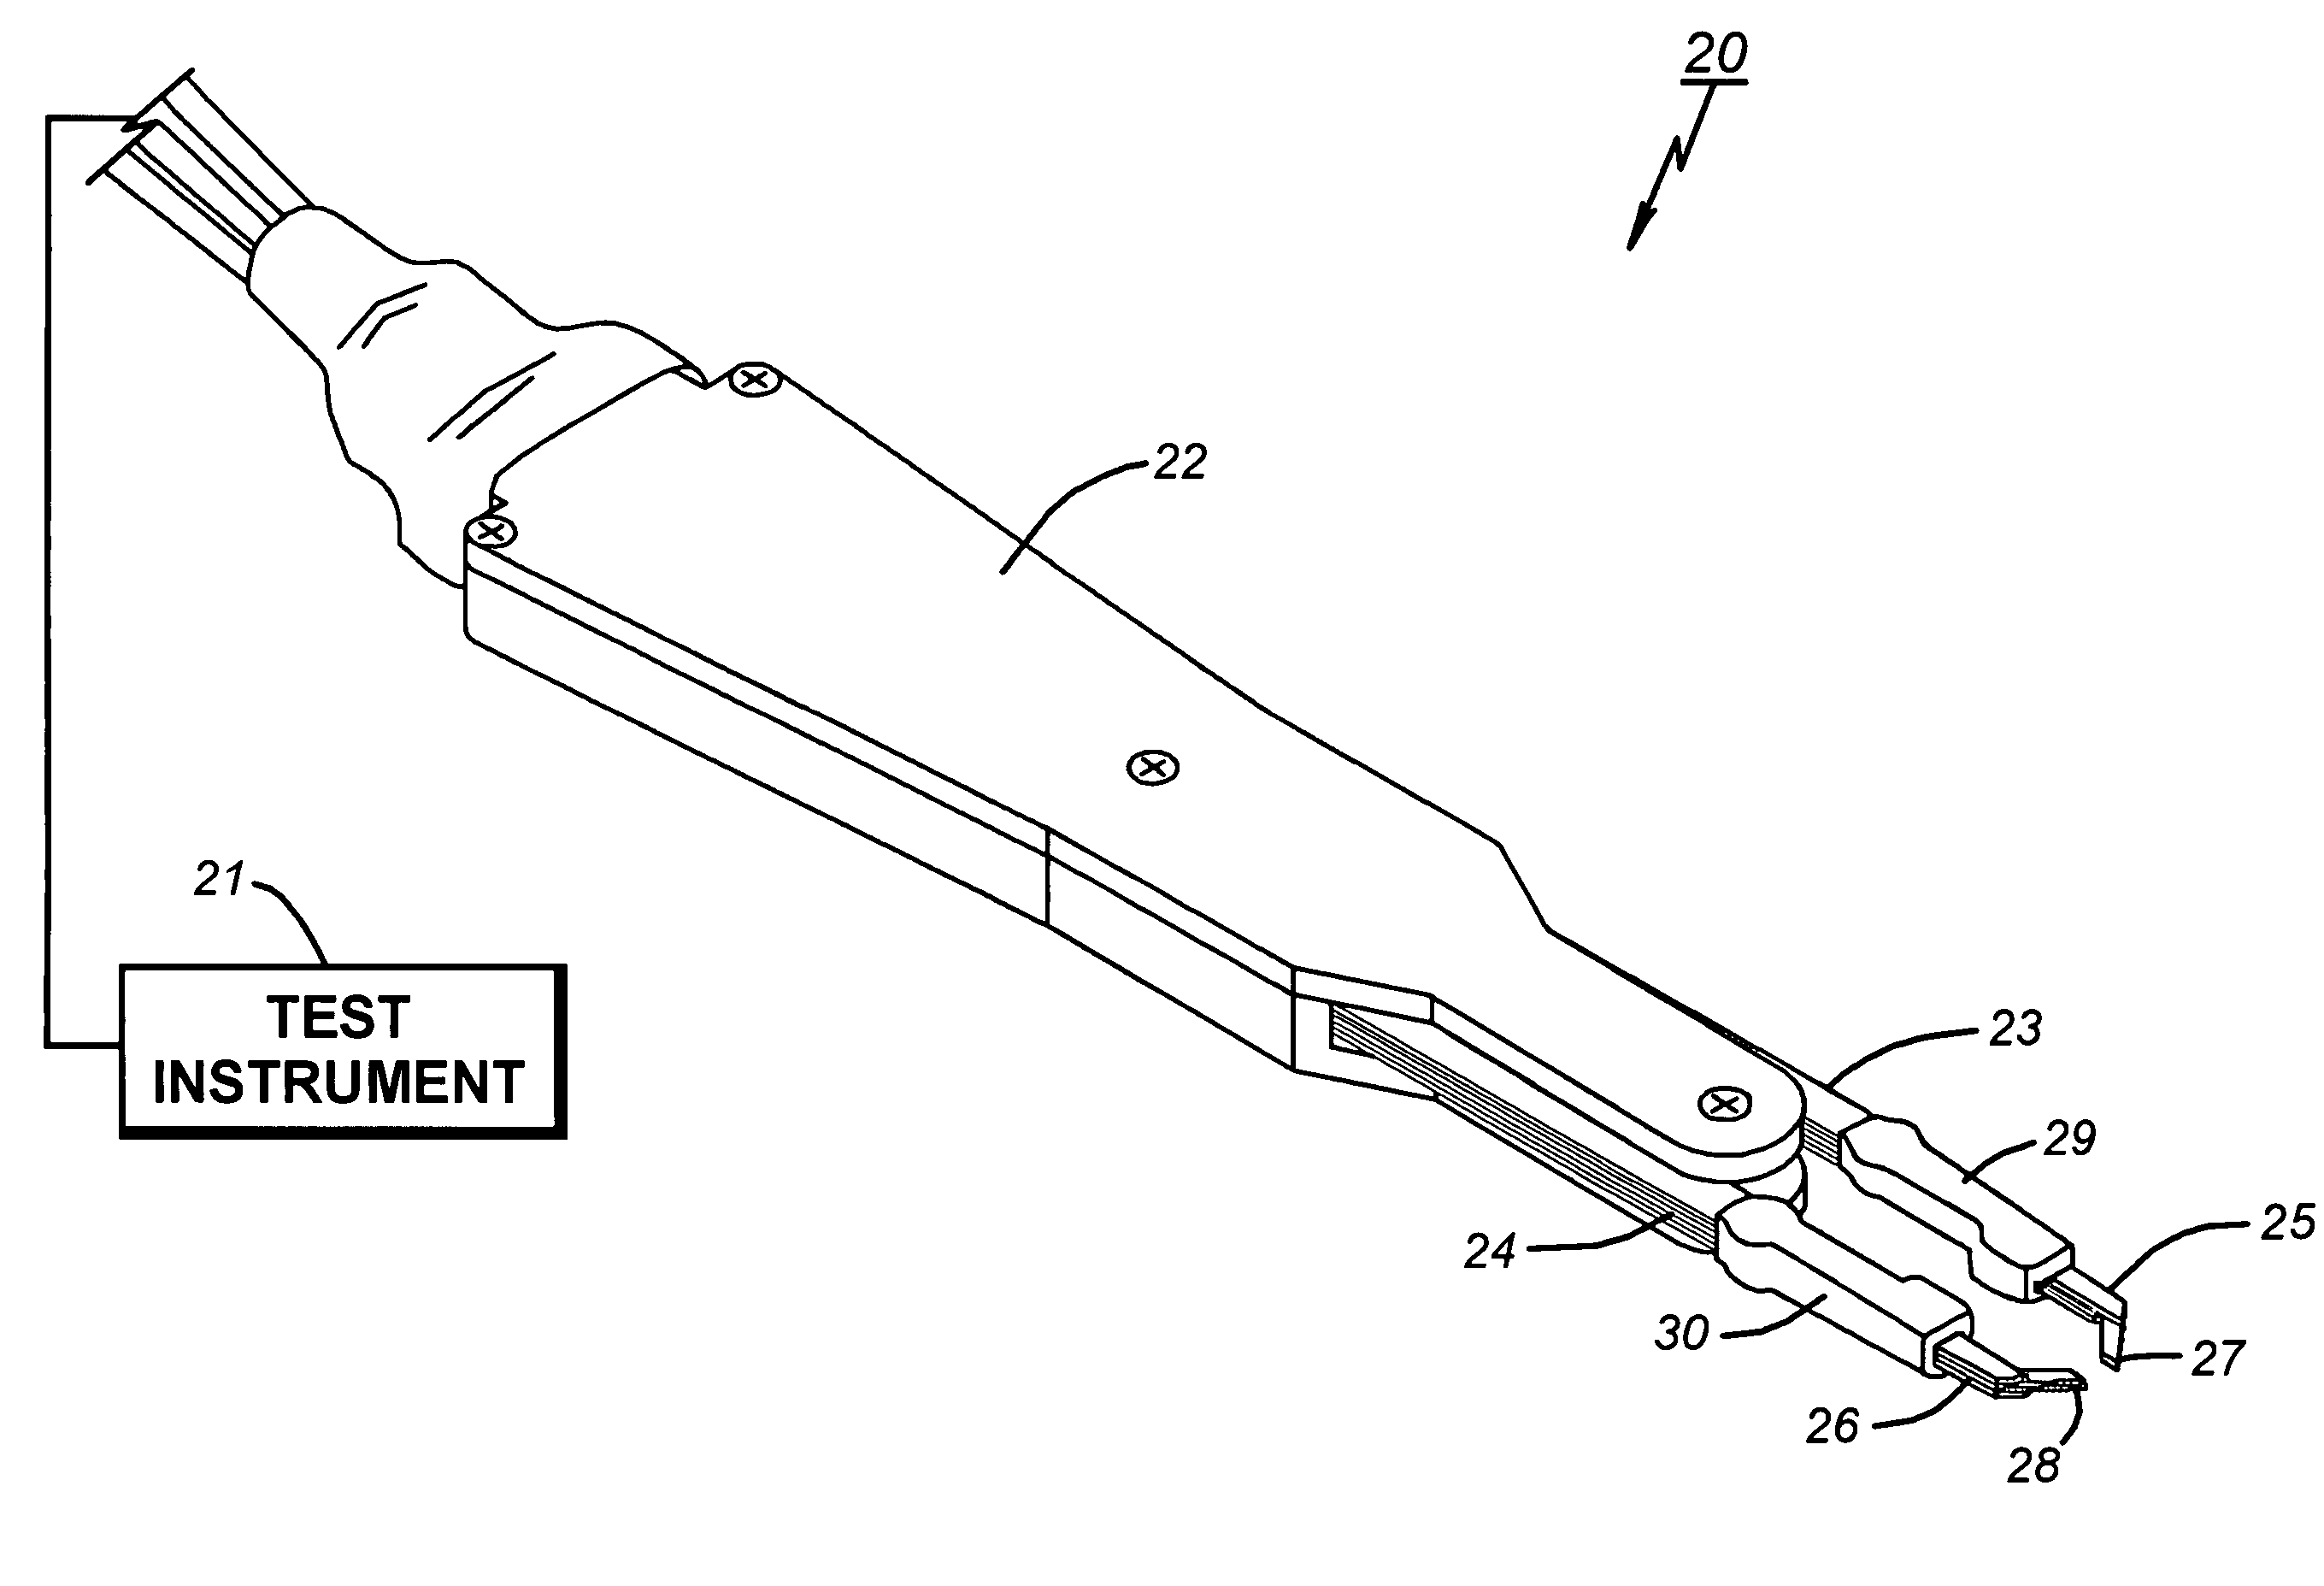 Handheld electronic test probe assembly